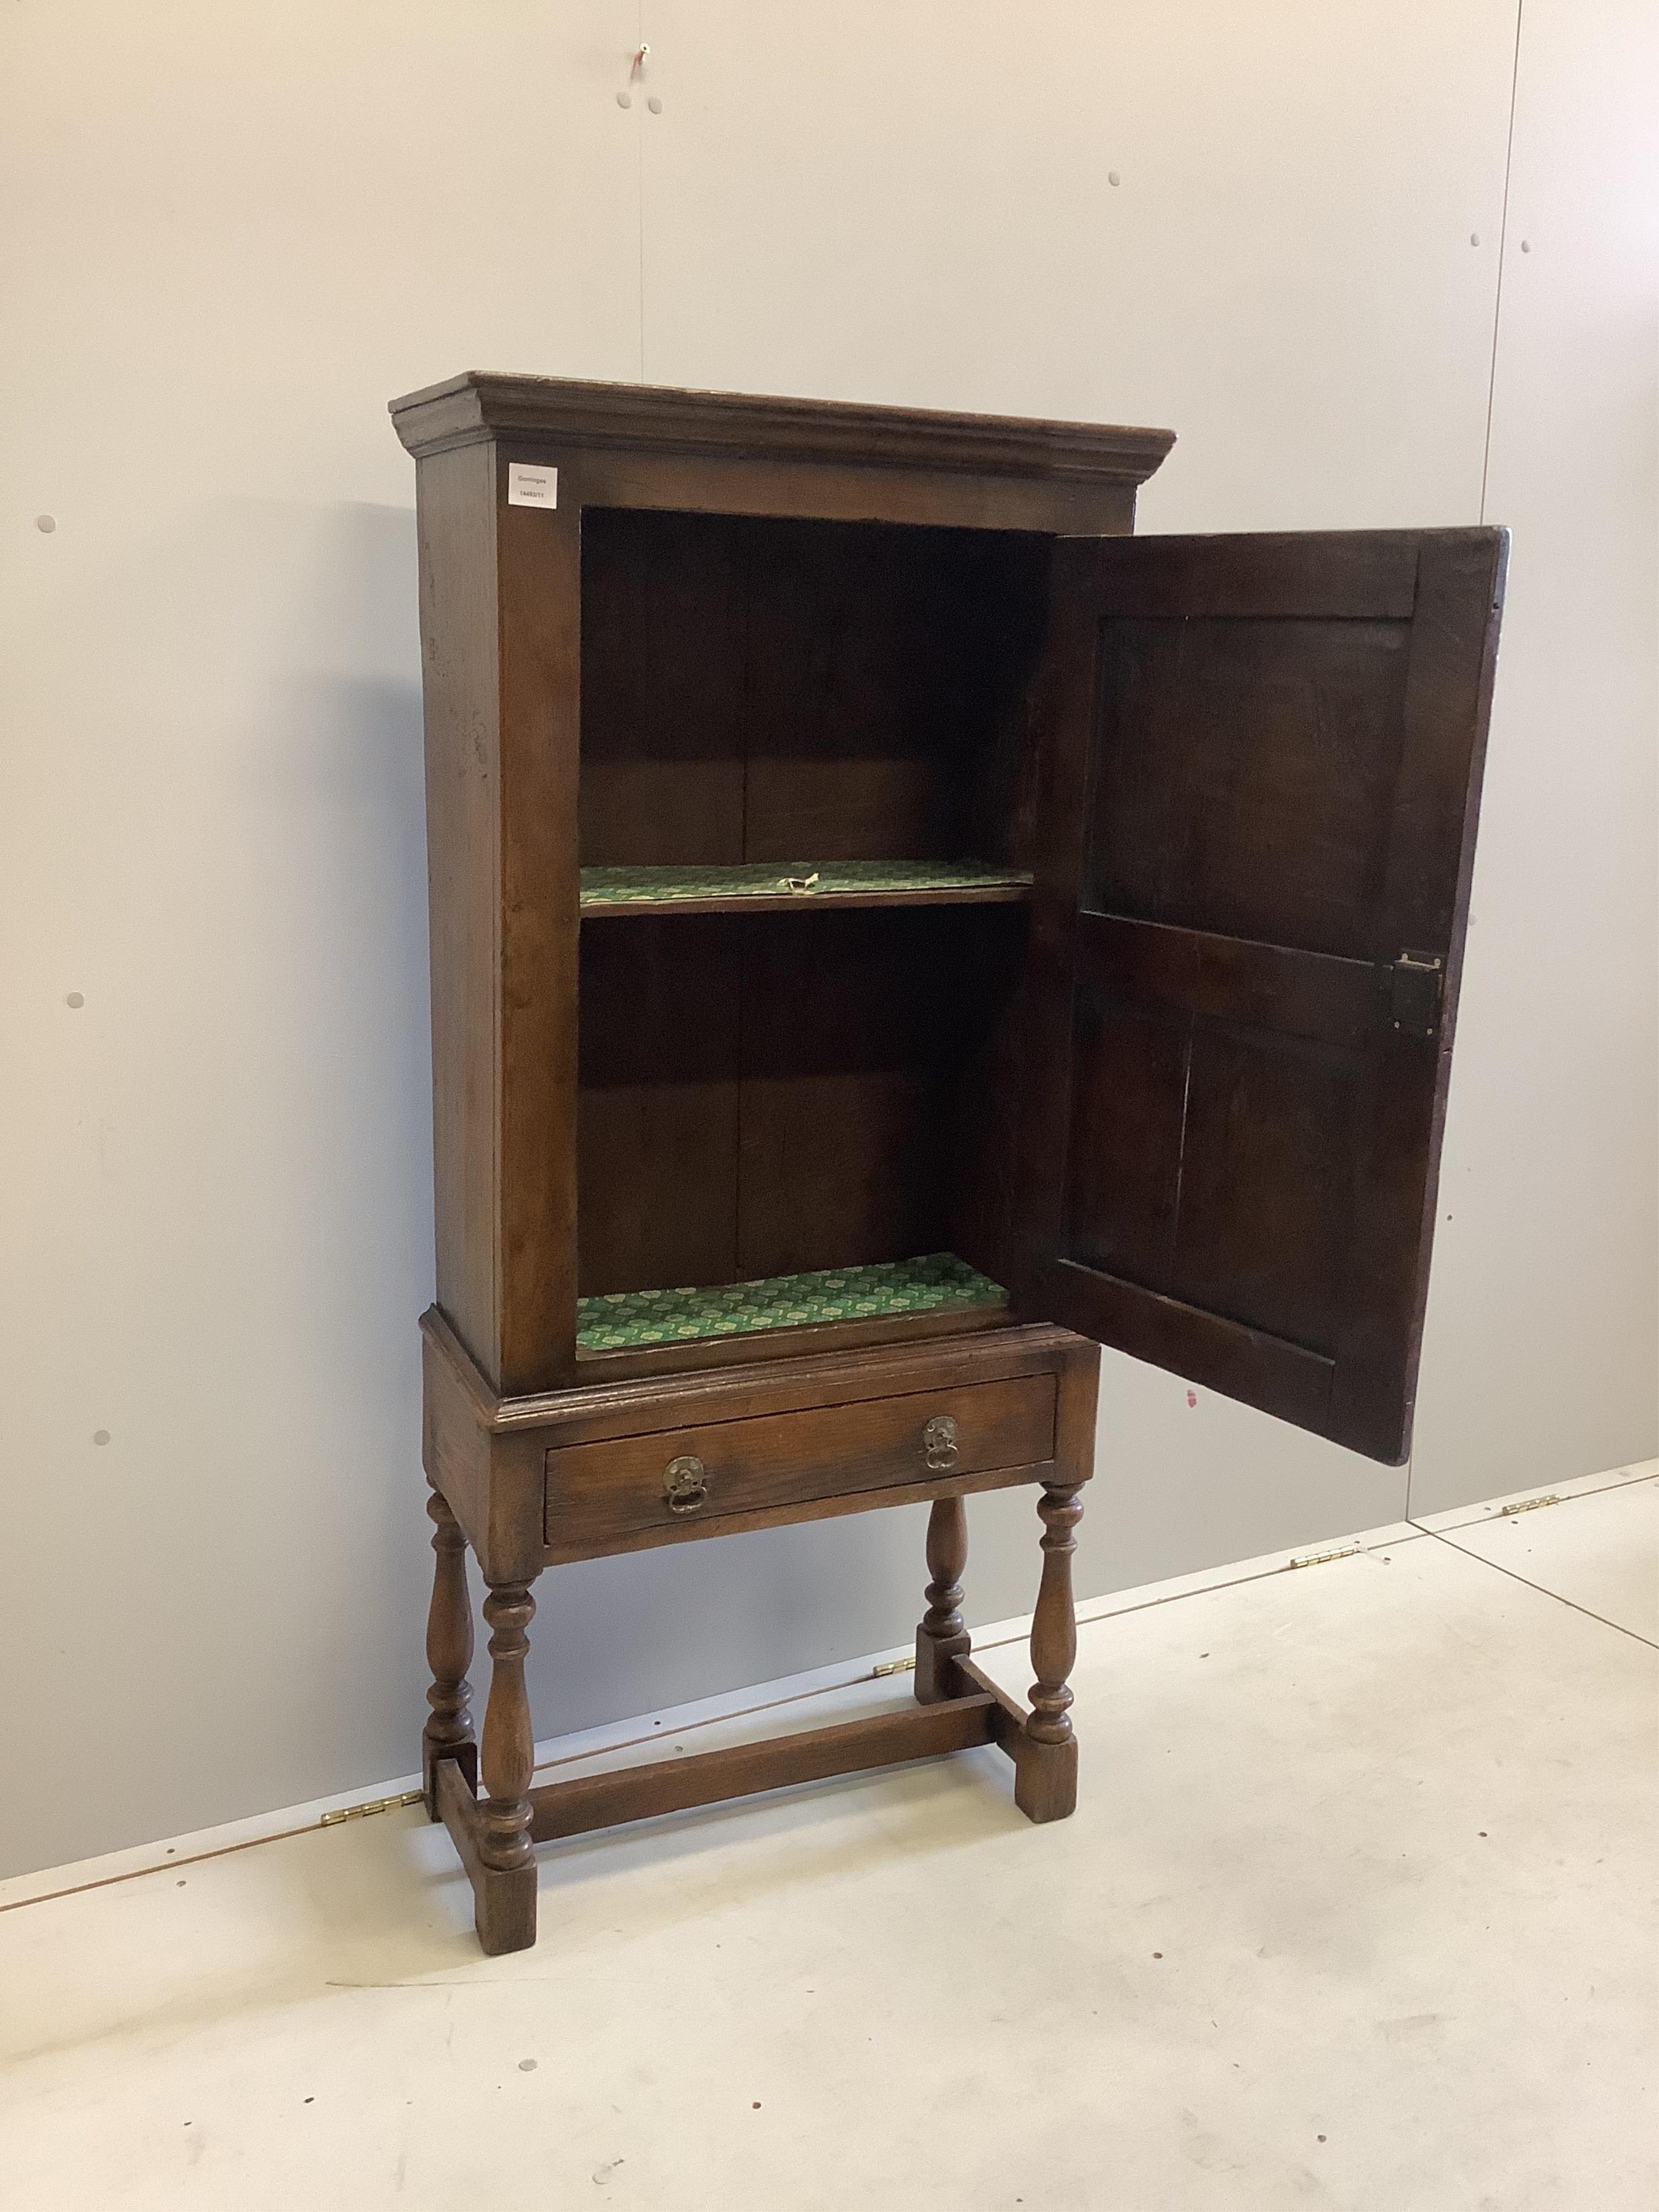 A 17th century style oak cupboard on stand, width 67cm, depth 29cm, height 143cm. Condition - good